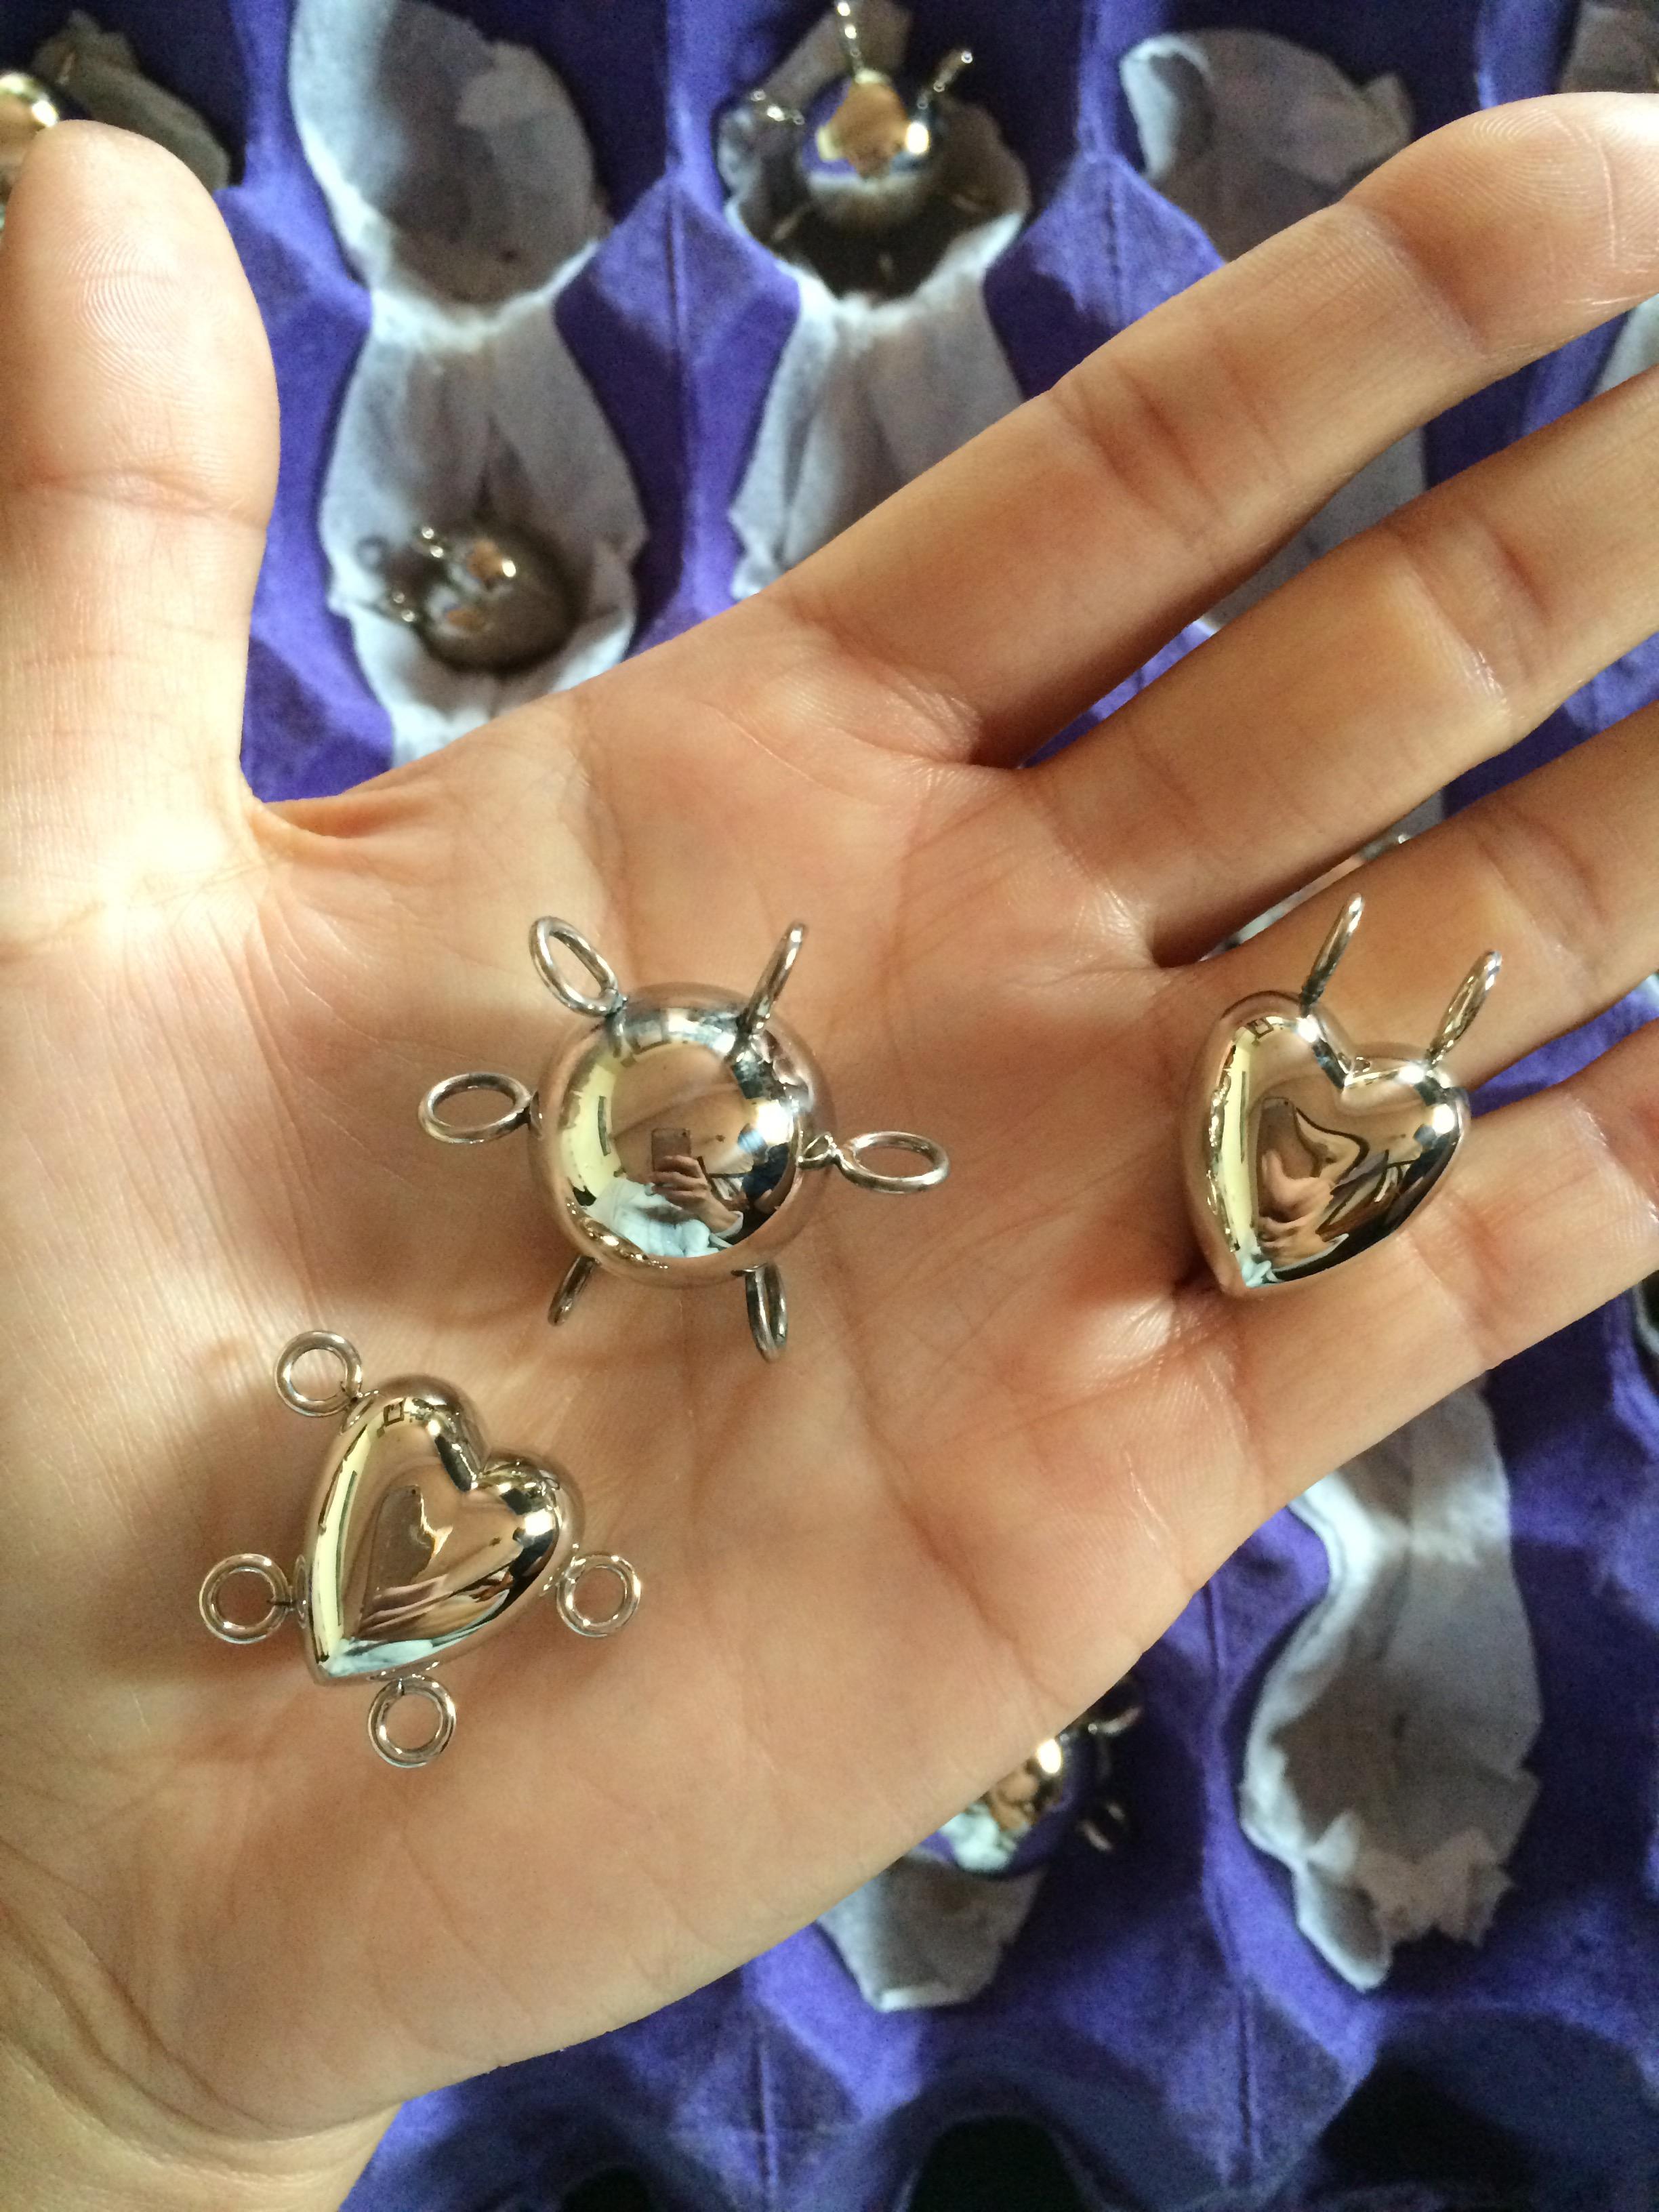 A close-up of a hand, palm up, holding three reflective silver charms. Two are heart-shaped and one is spherical, and each has several hooks for affixing to a chain.